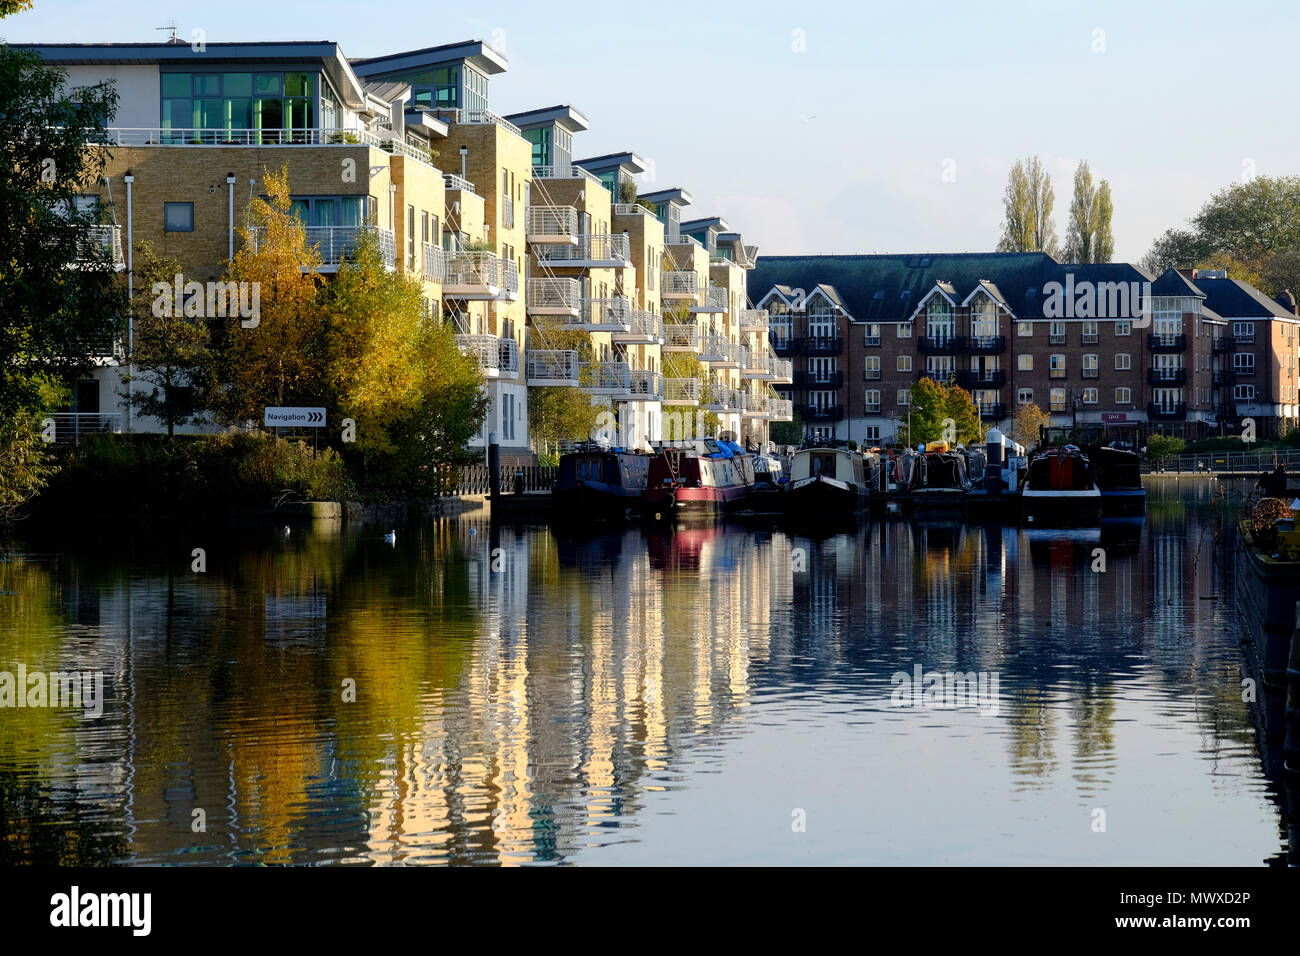 Brentford Canal and apartments, Brentford, London, England, United Kingdom, Europe Stock Photo